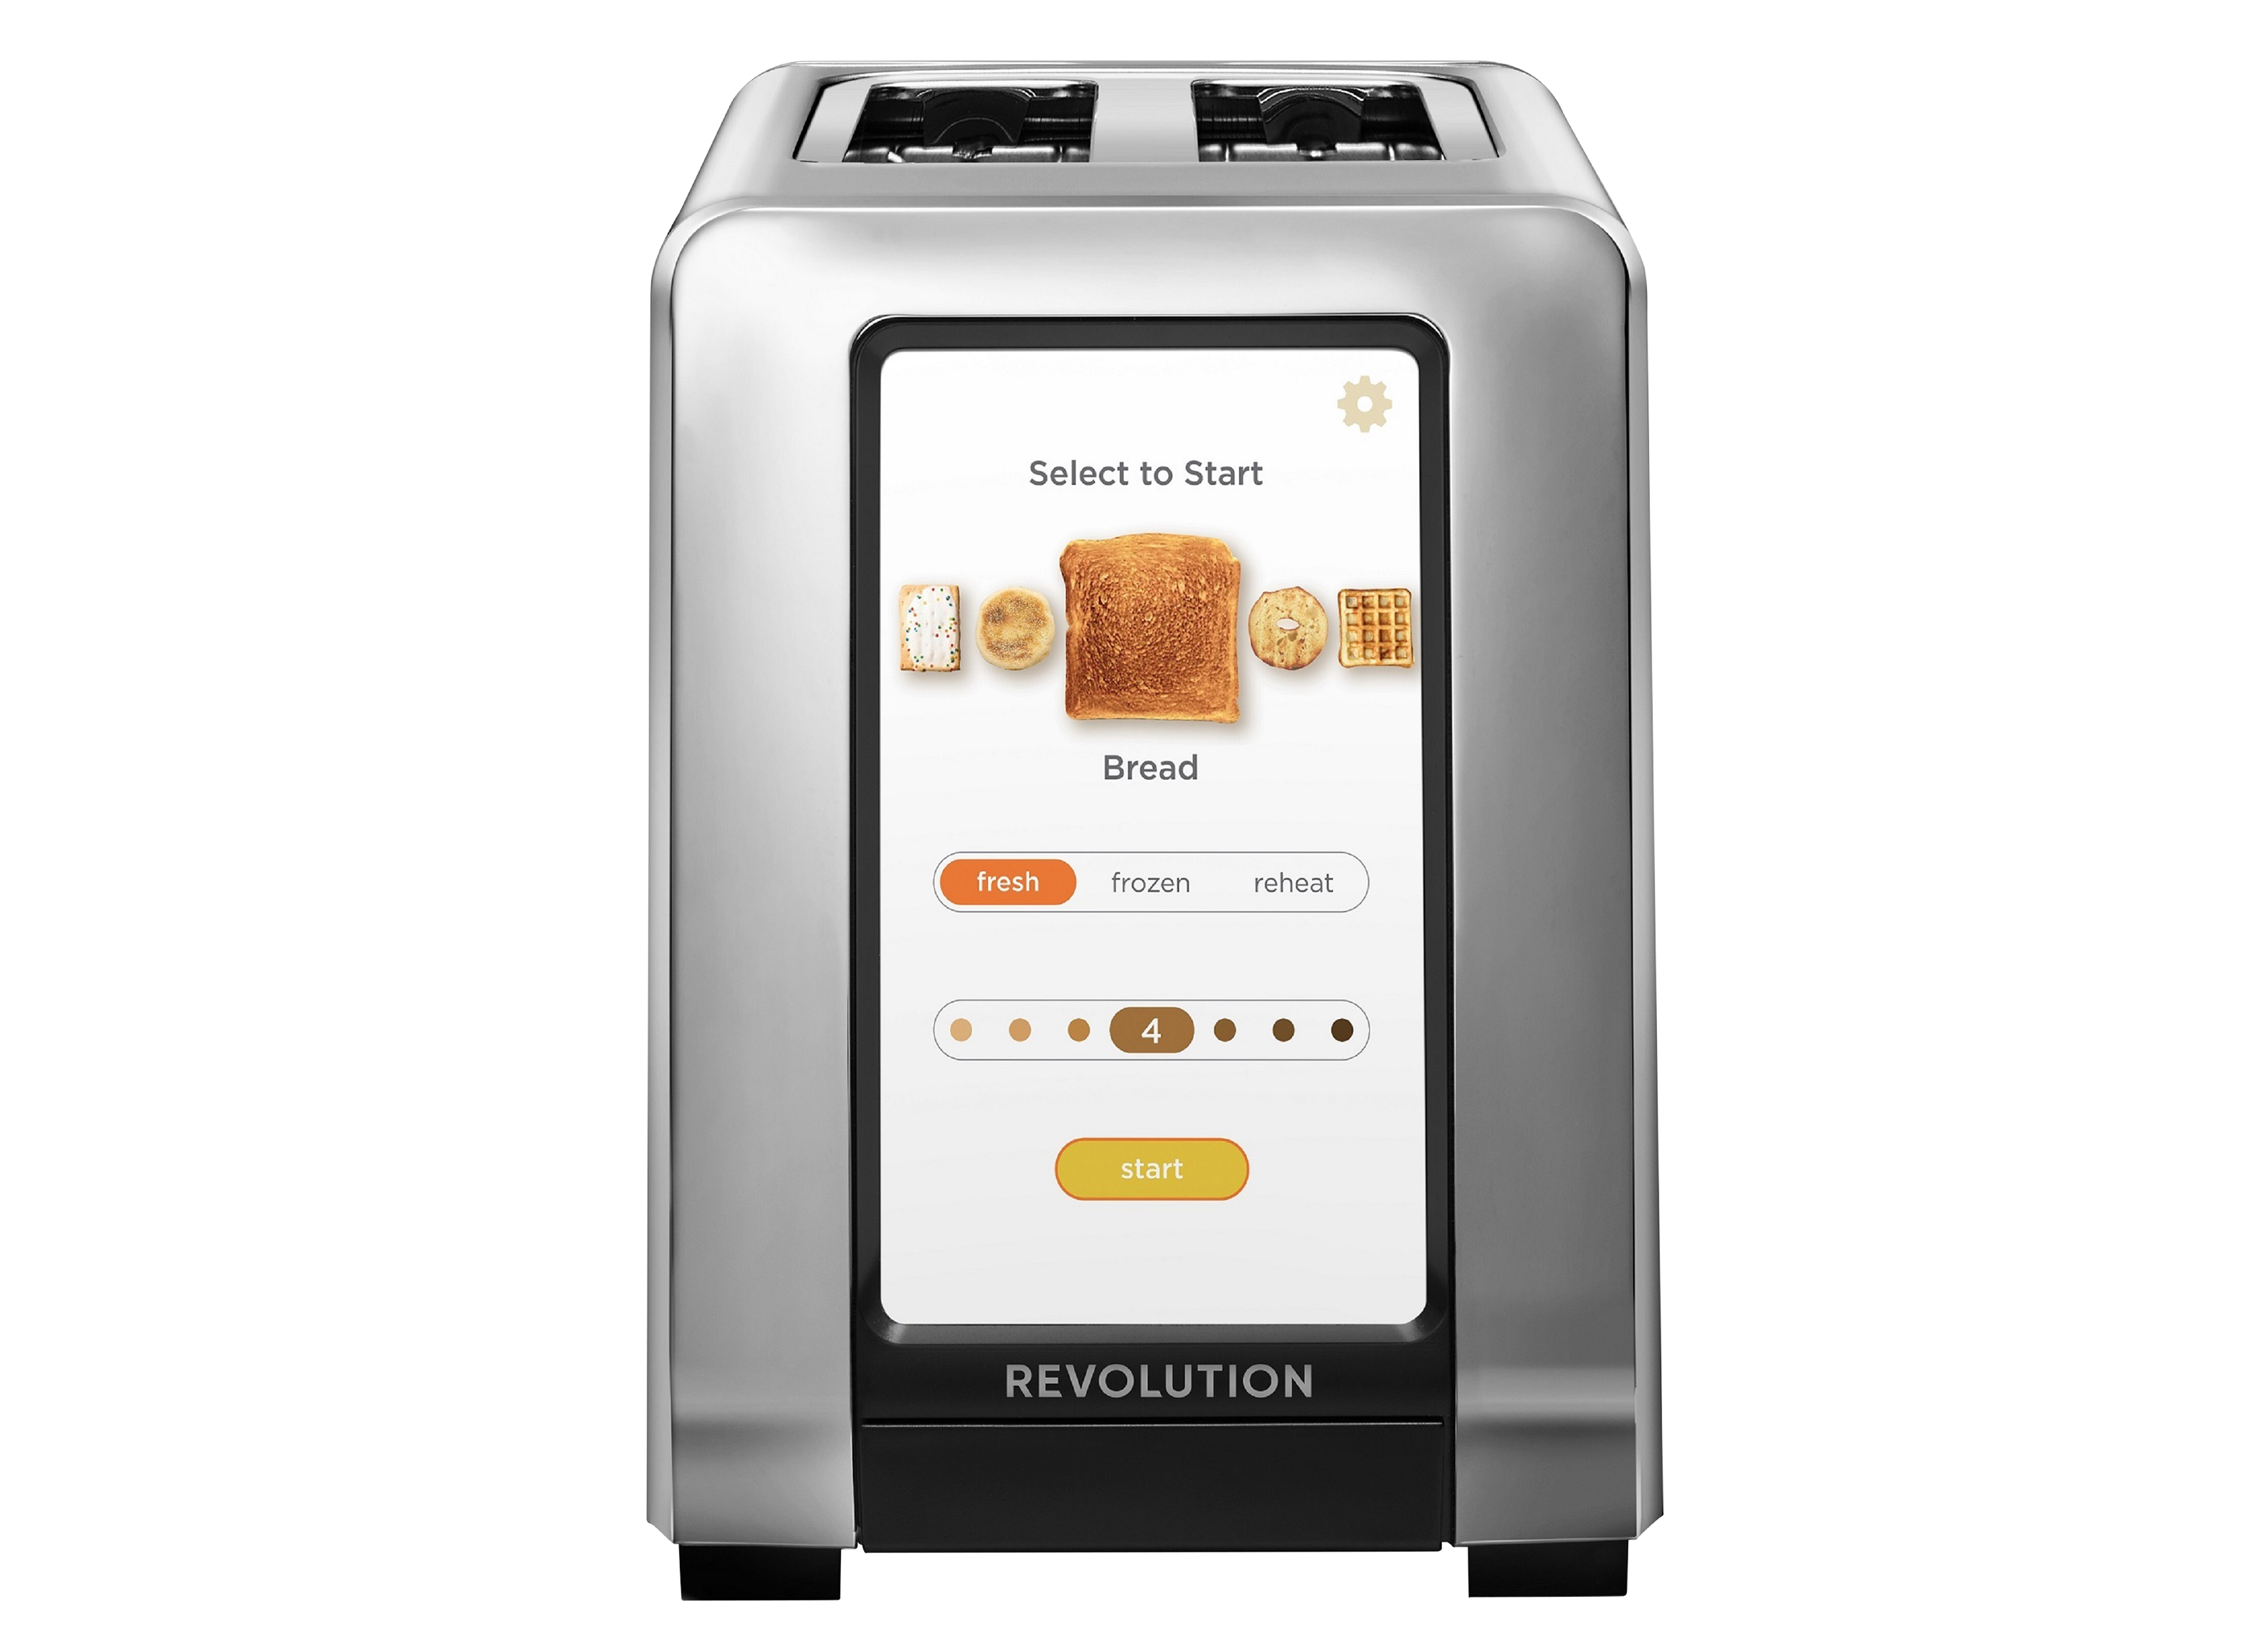 https://crdms.images.consumerreports.org/prod/products/cr/models/406544-2-slice-toasters-revolution-instaglo-r180-2-slice-high-speed-smart-toaster-10029729.png